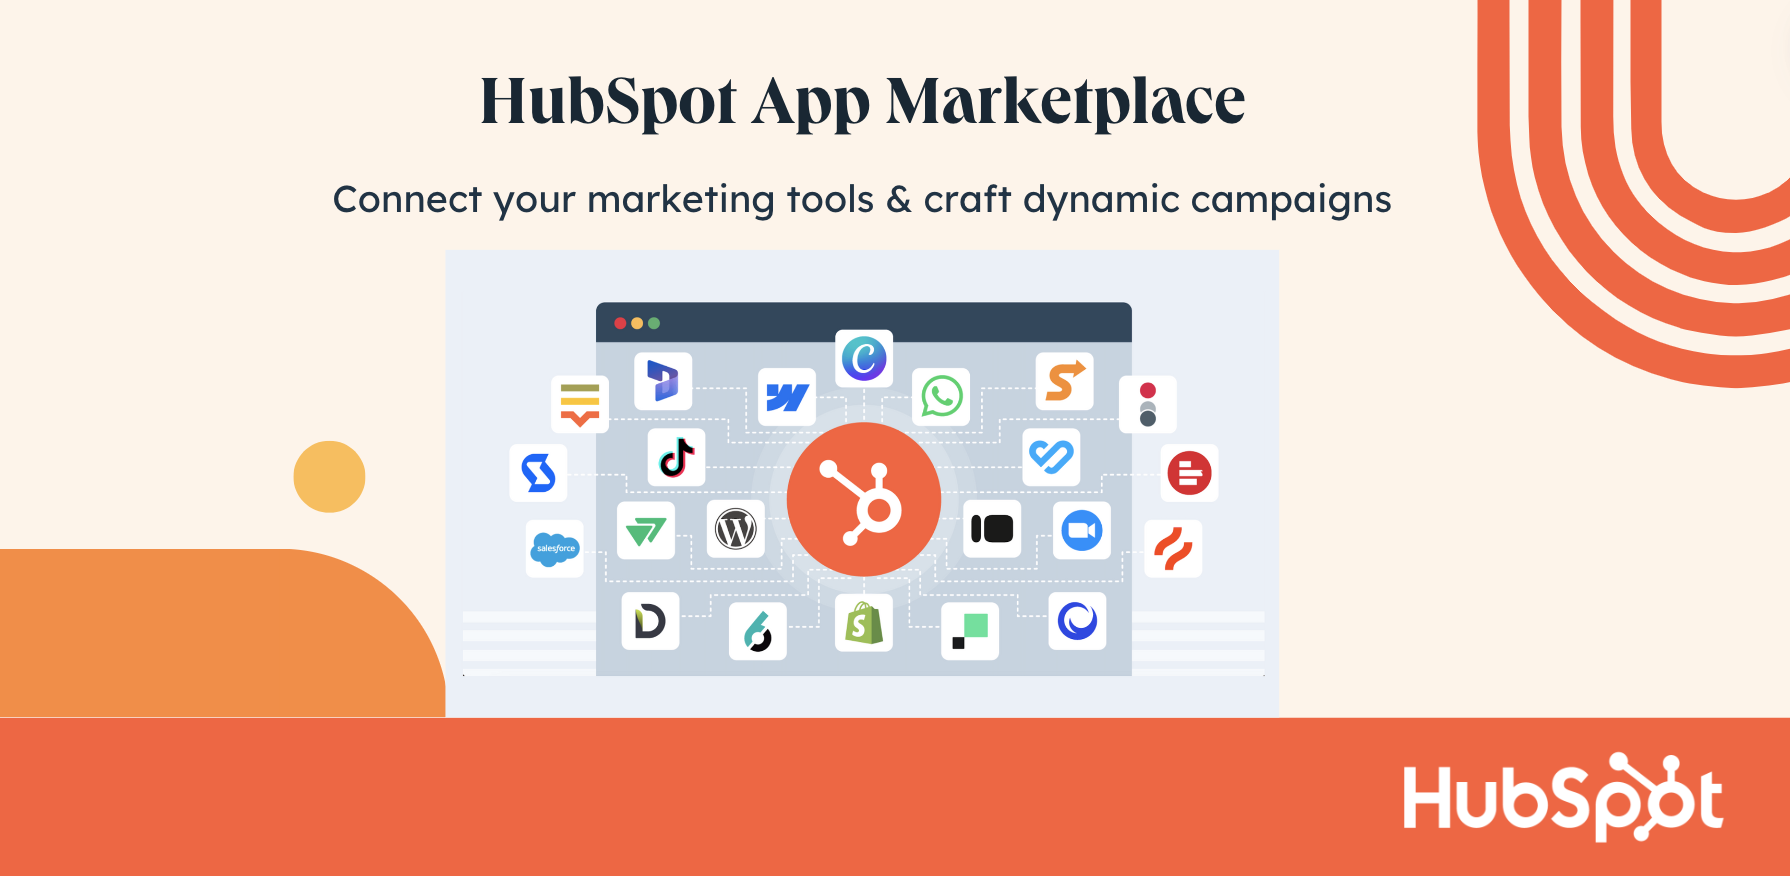 HubSpot essential apps for marketers